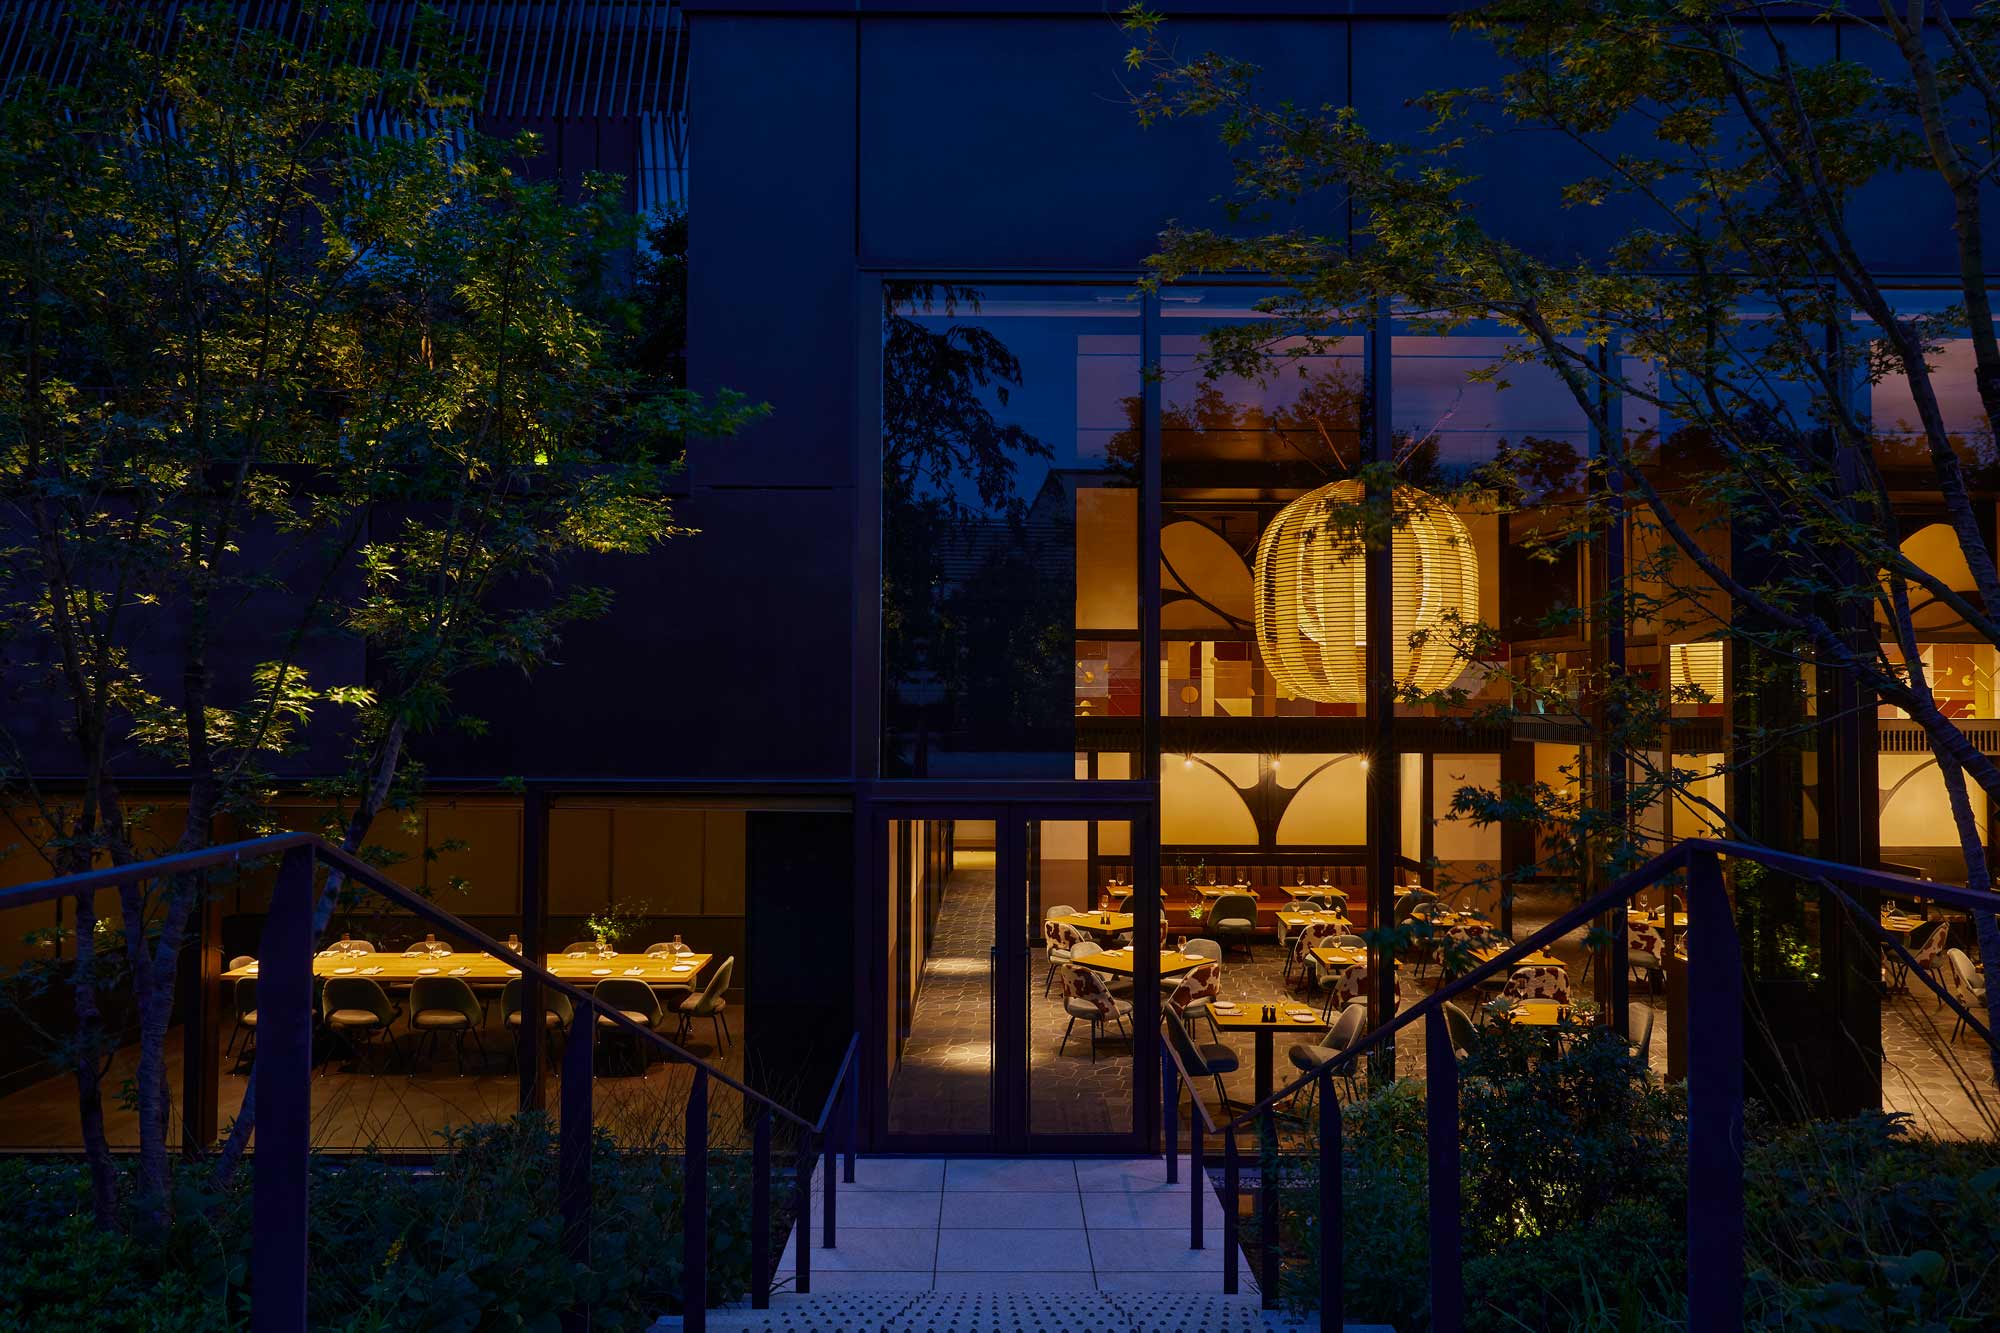 The three Michelin star restaurant will open its doors for lunch and dinner at Ace Hotel Kyoto